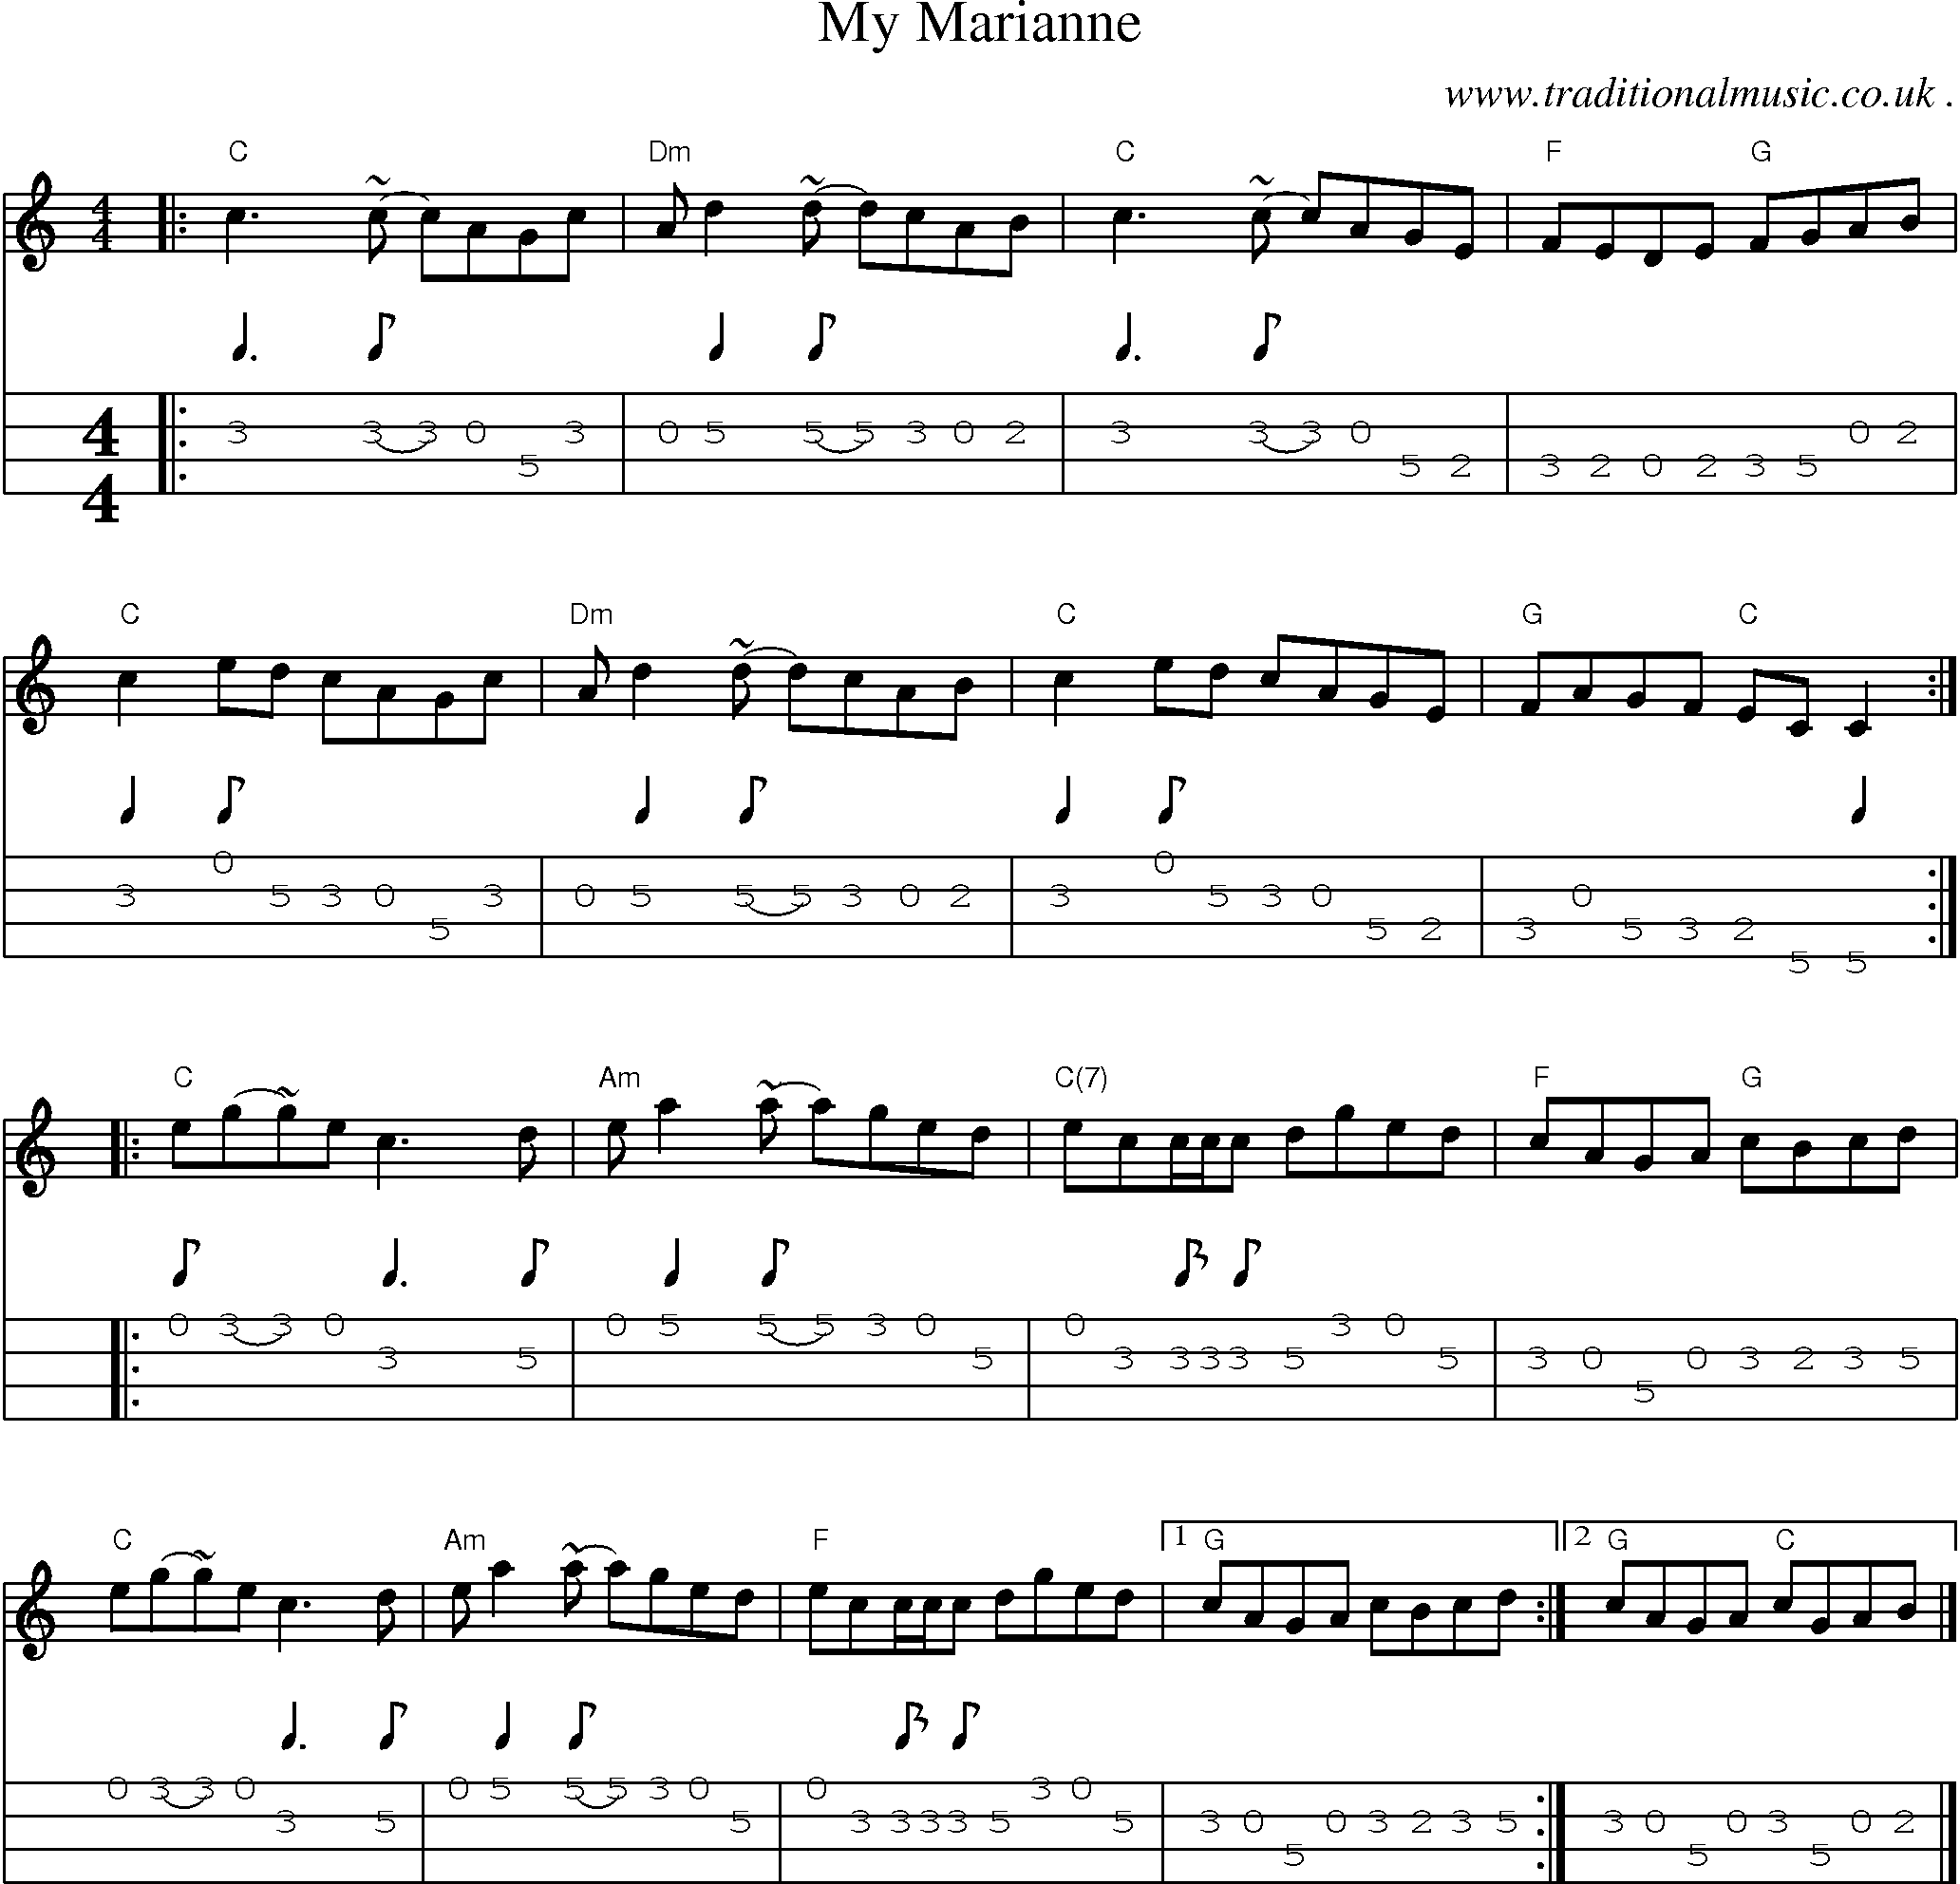 Music Score and Guitar Tabs for My Marianne